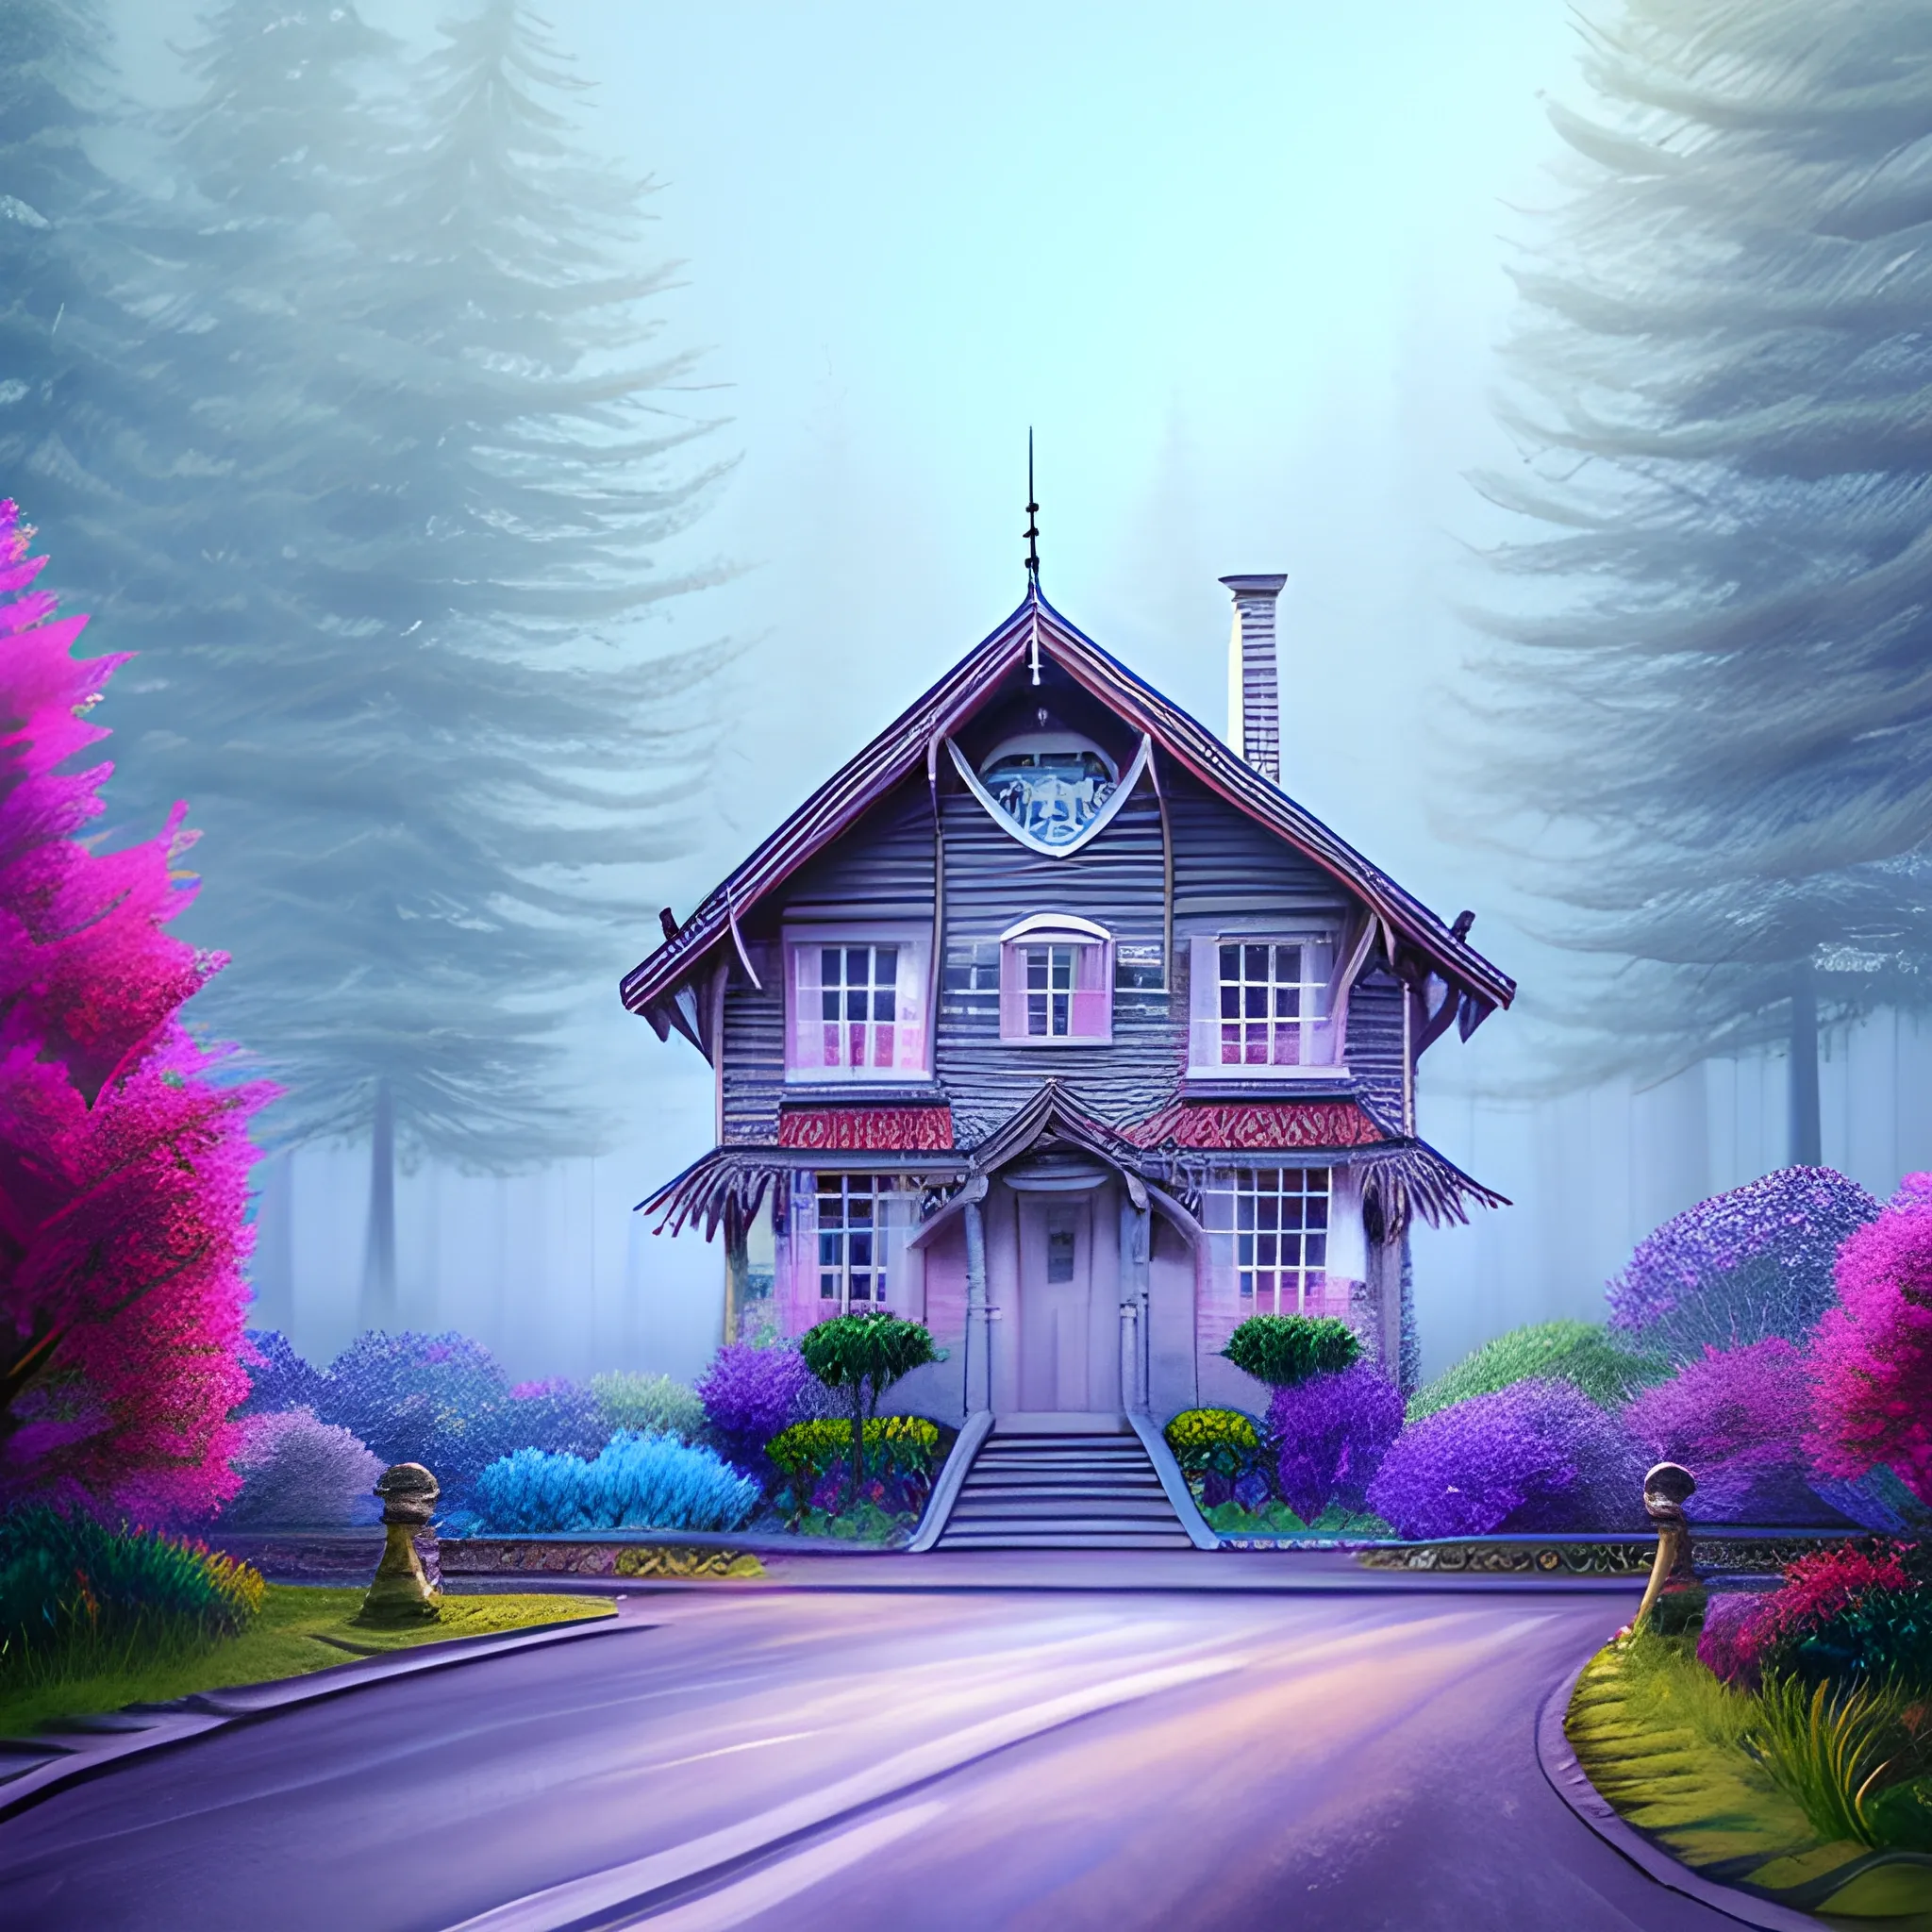 Realistic: Detailed depiction of the trees, house, and children with realistic clothing and facial expressions.
Cartoon: Bright colors, simplified details, exaggerated facial expressions.
Fantasy: Foggy colors, trees that seem to move, the house appearing as if it's alive.


